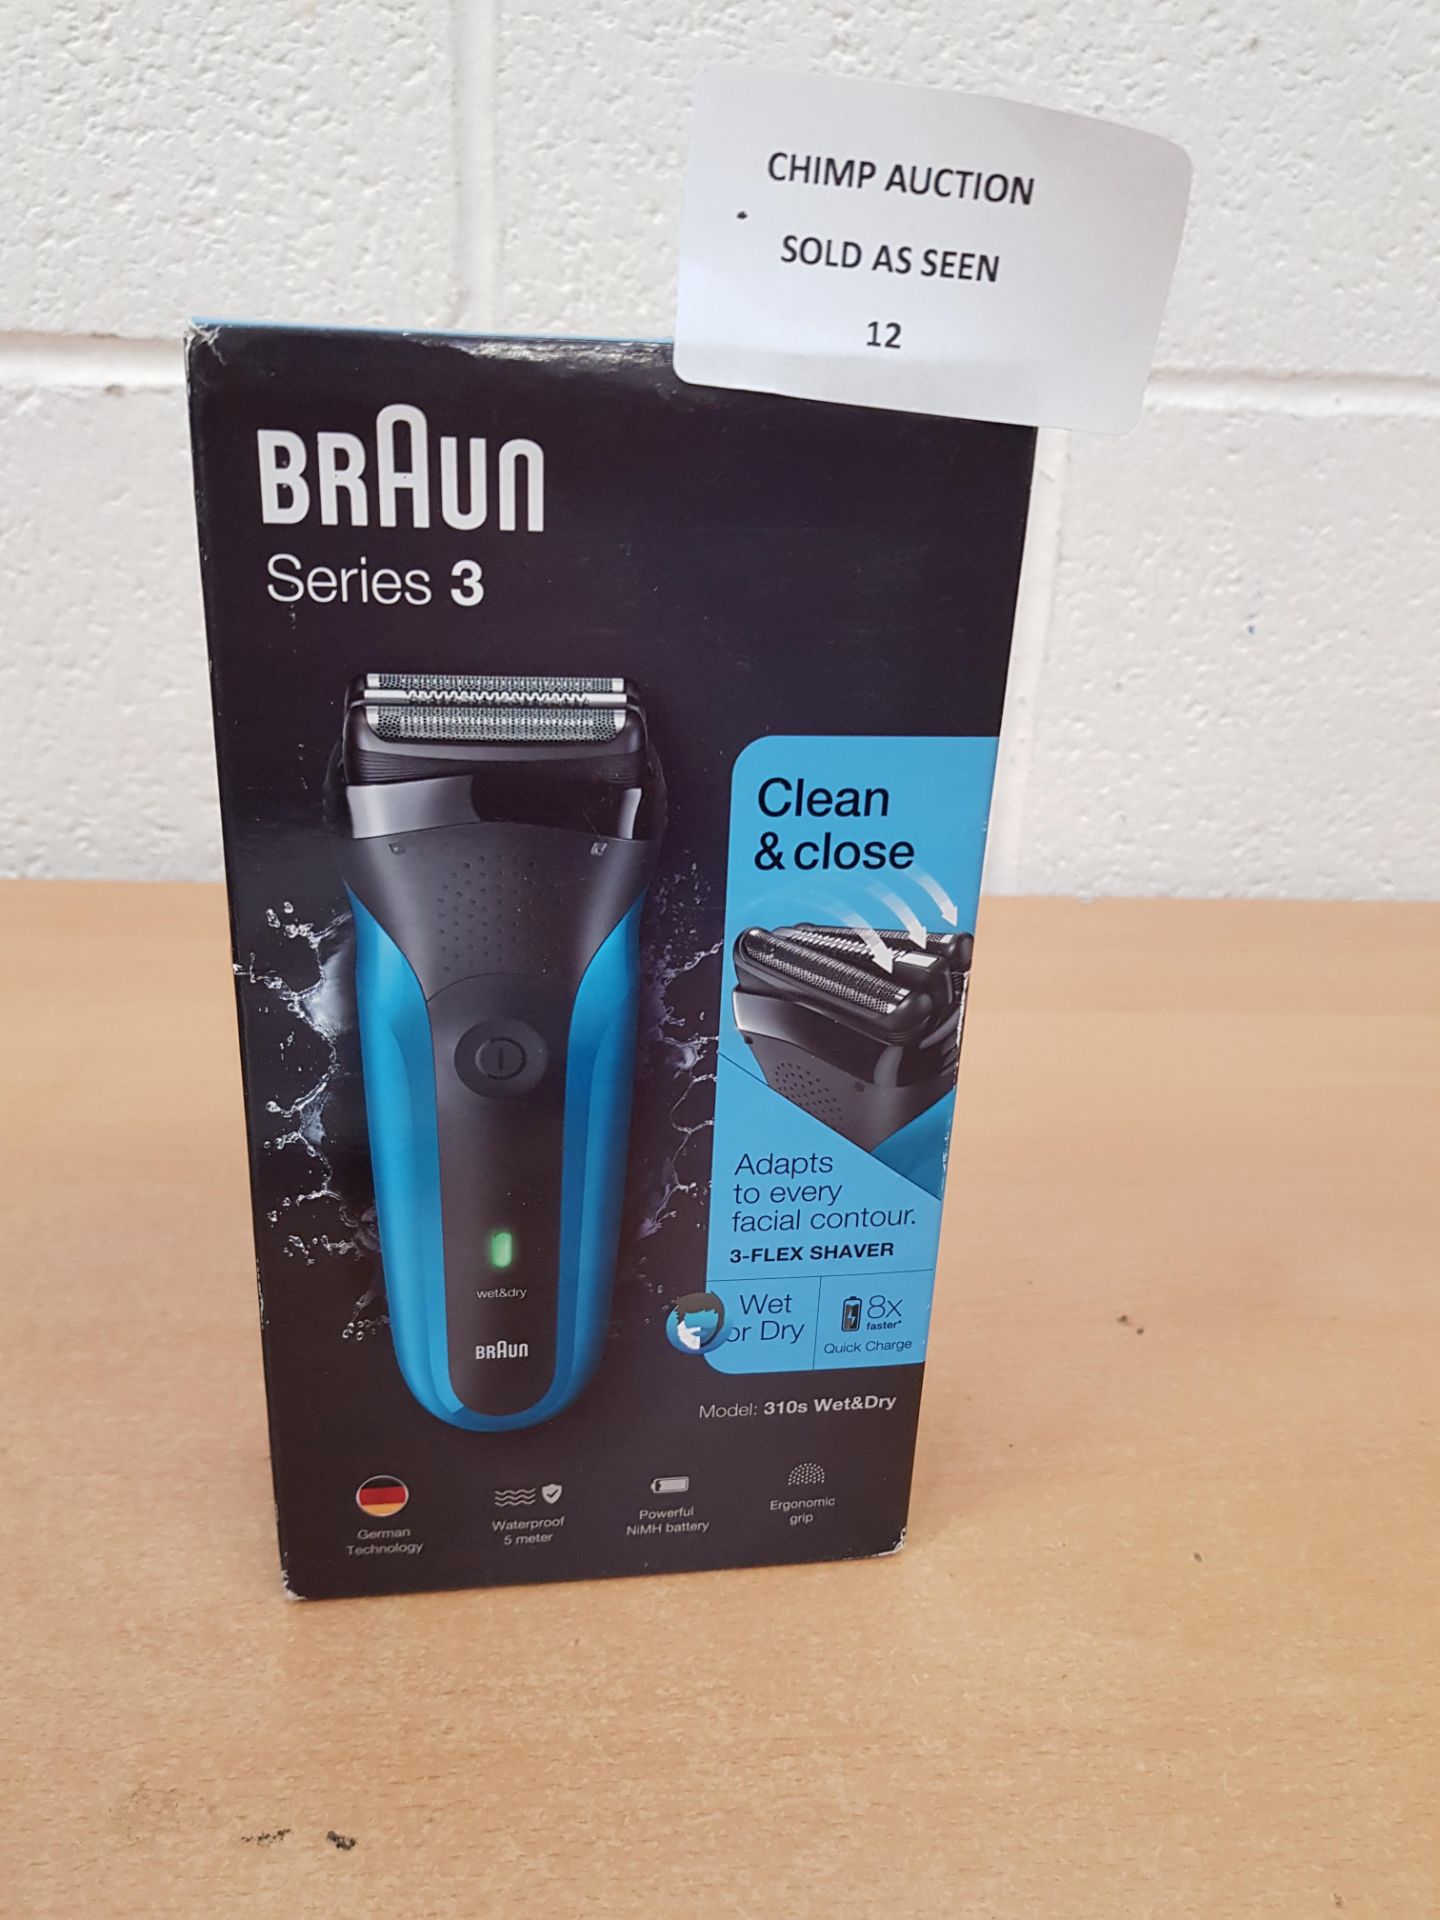 Braun Series 3 310s Wet and Dry Electric Shaver RRP £49.99.